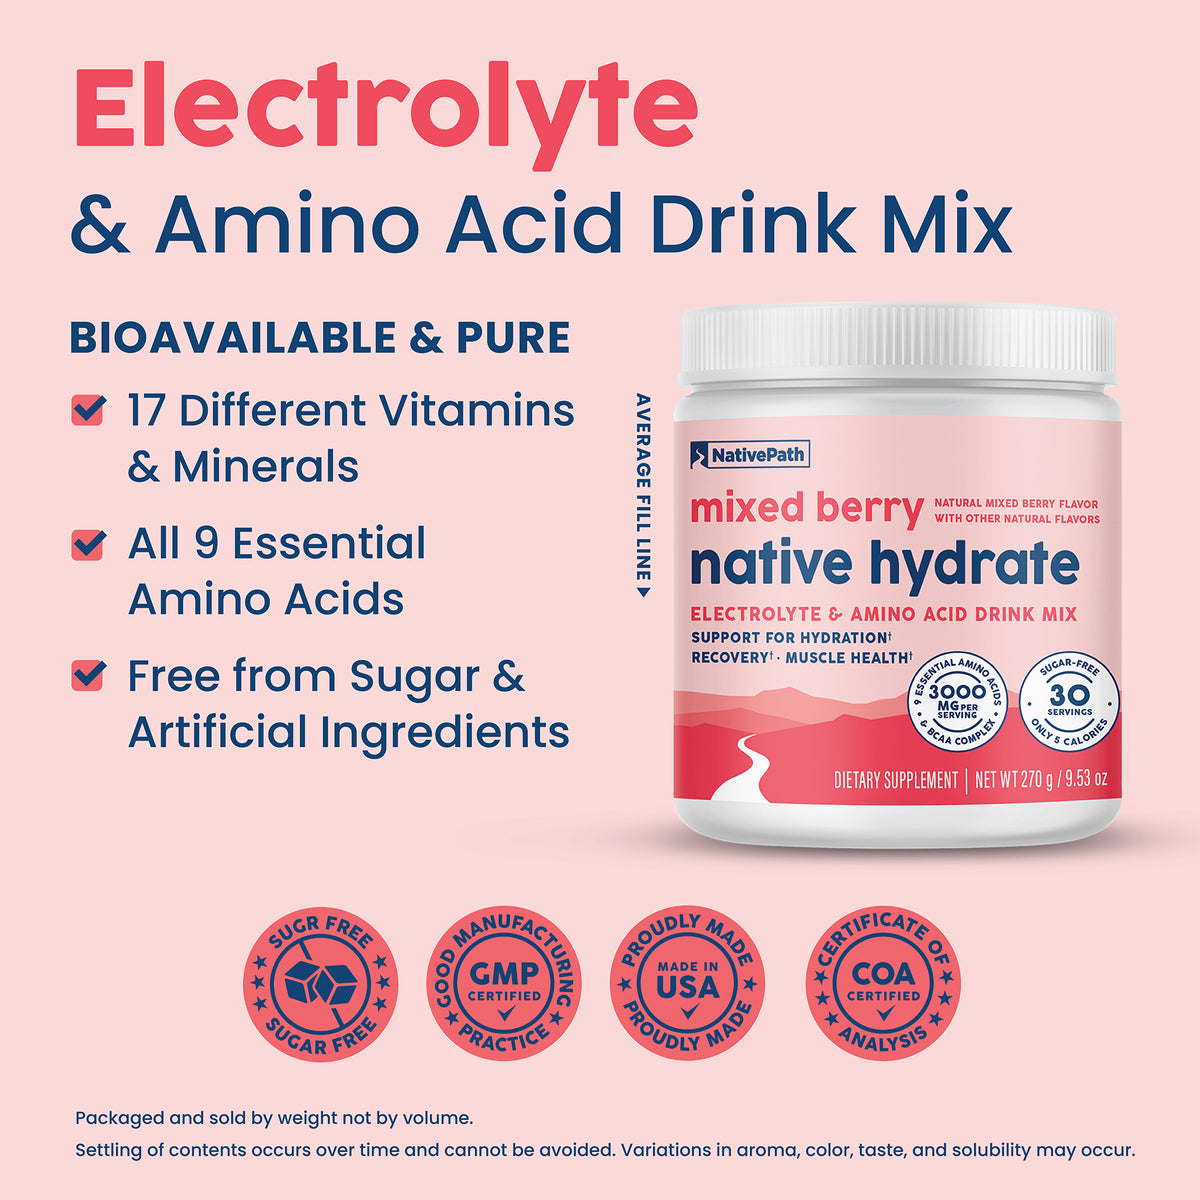 Mixed Berry Native Hydrate